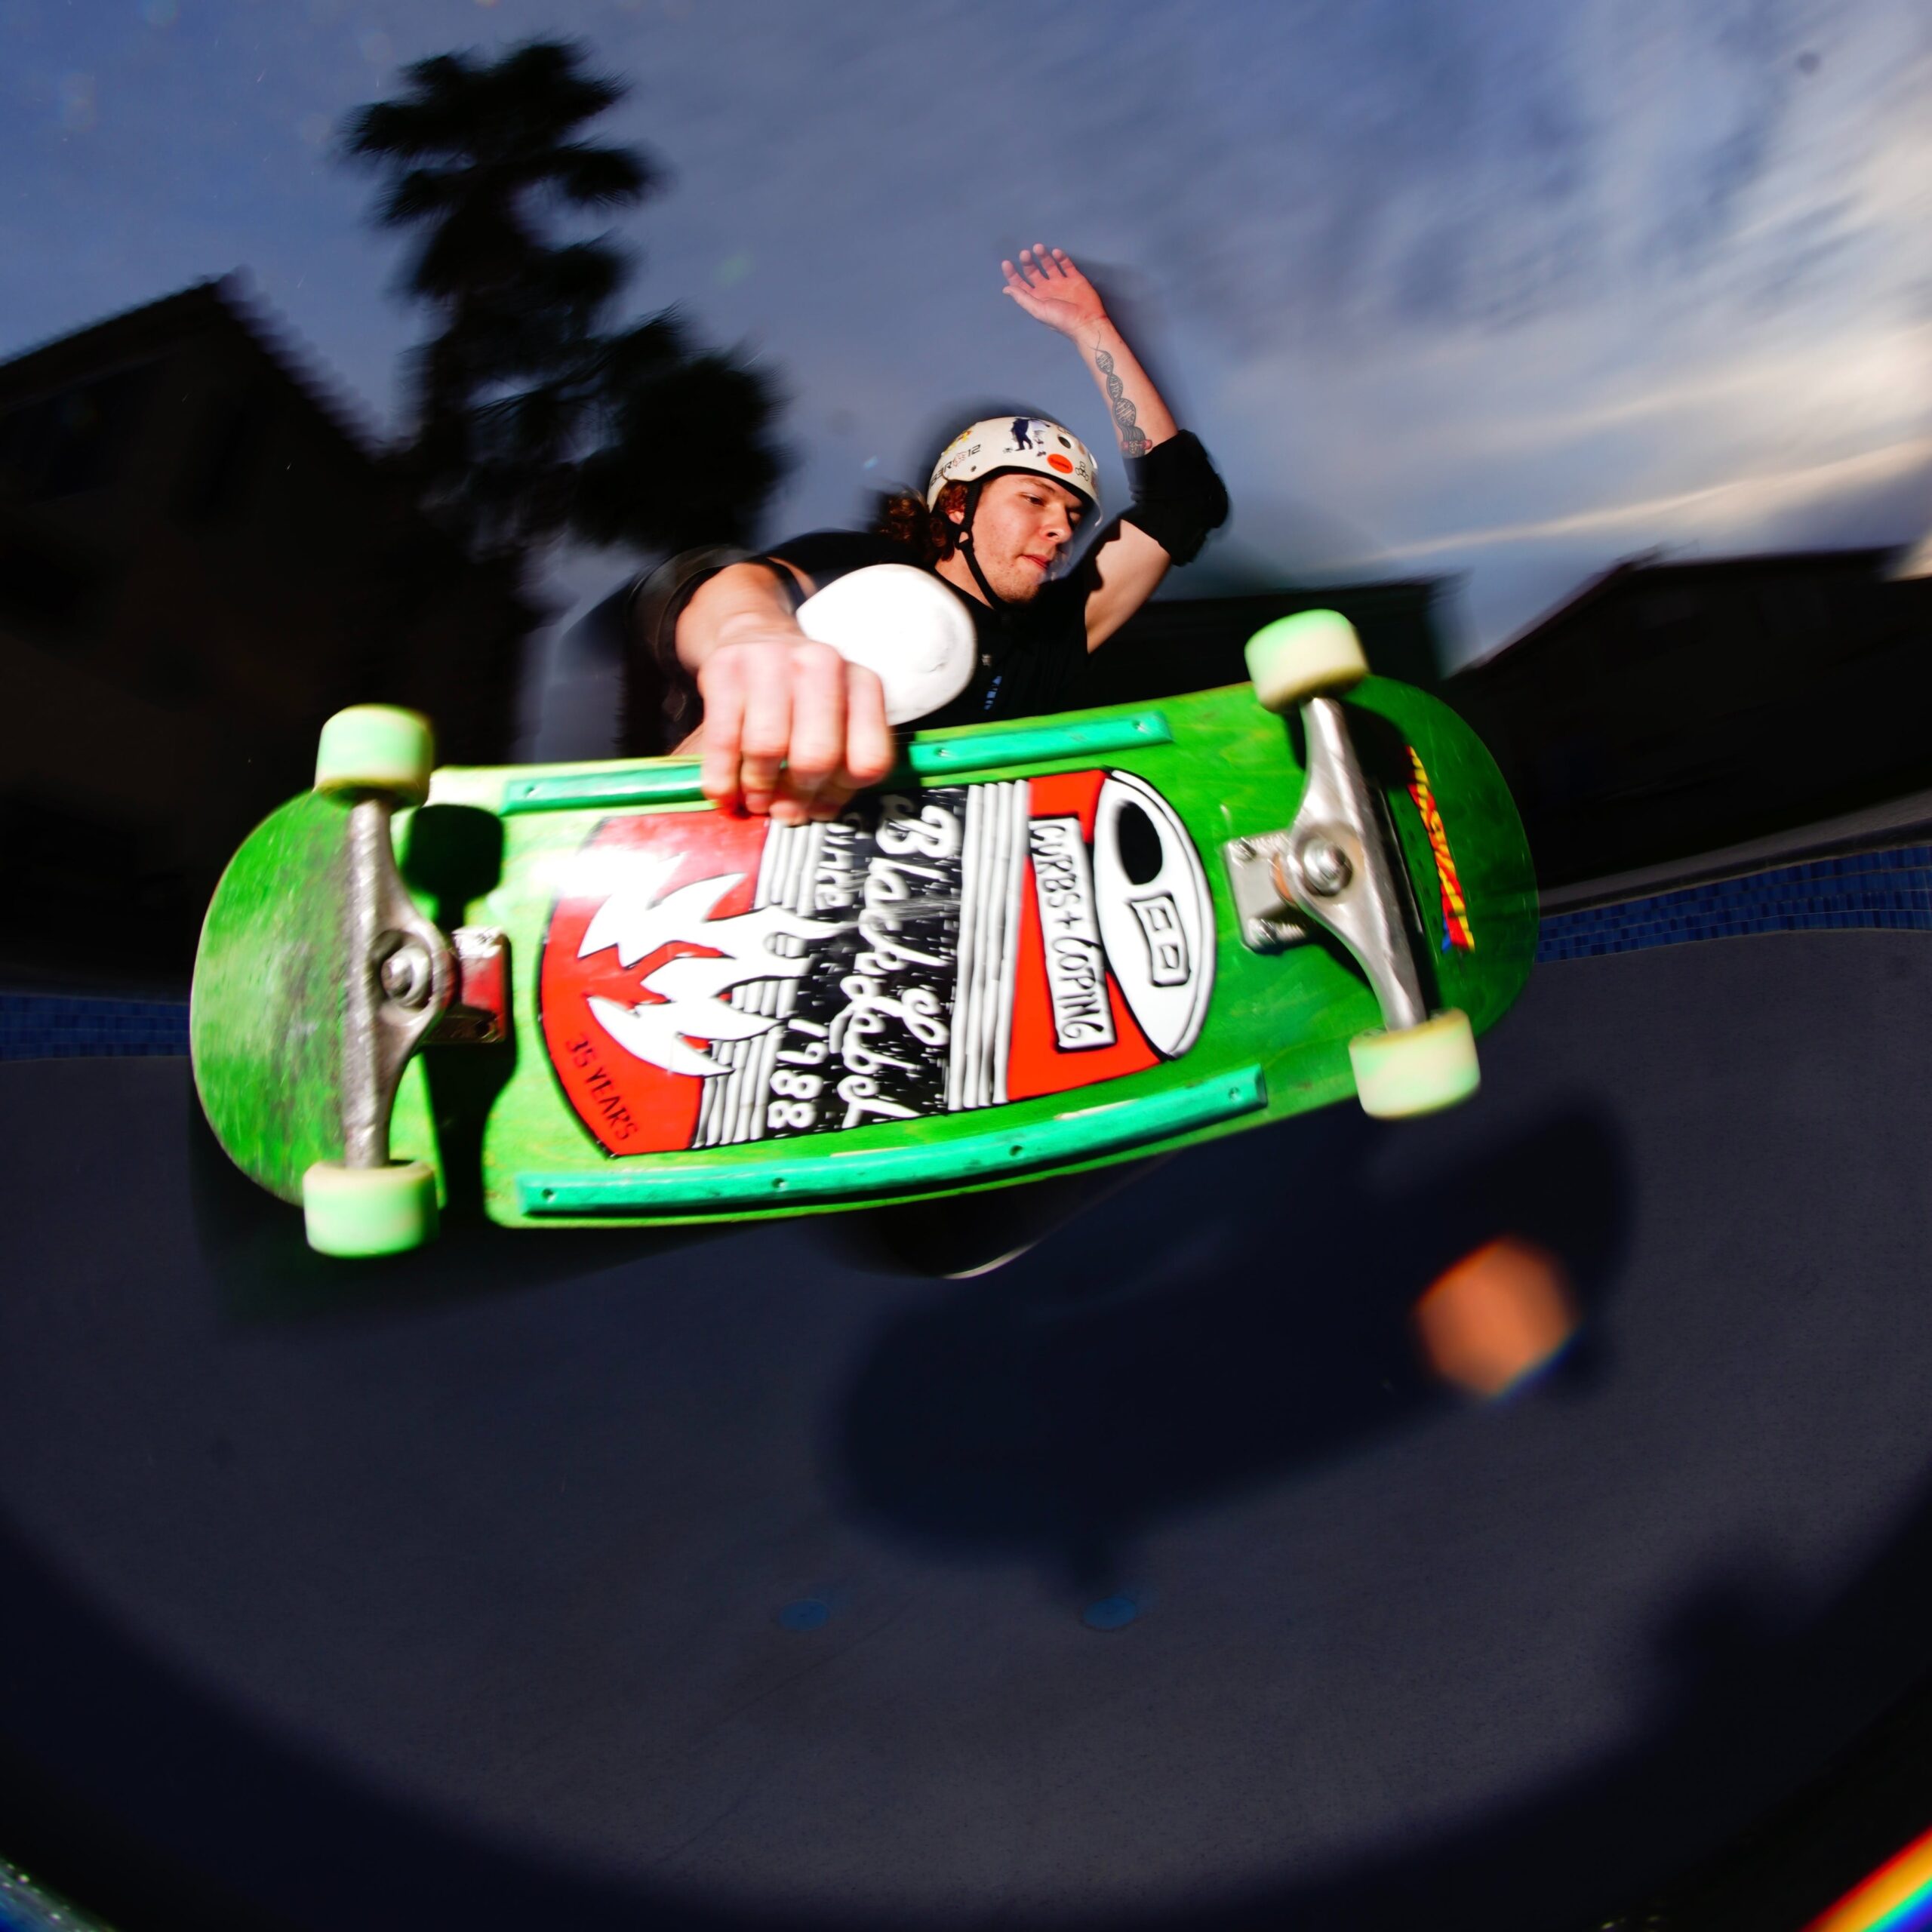 What Are The Key Elements Of Skateboard Pressure Flips And Hard Flips?